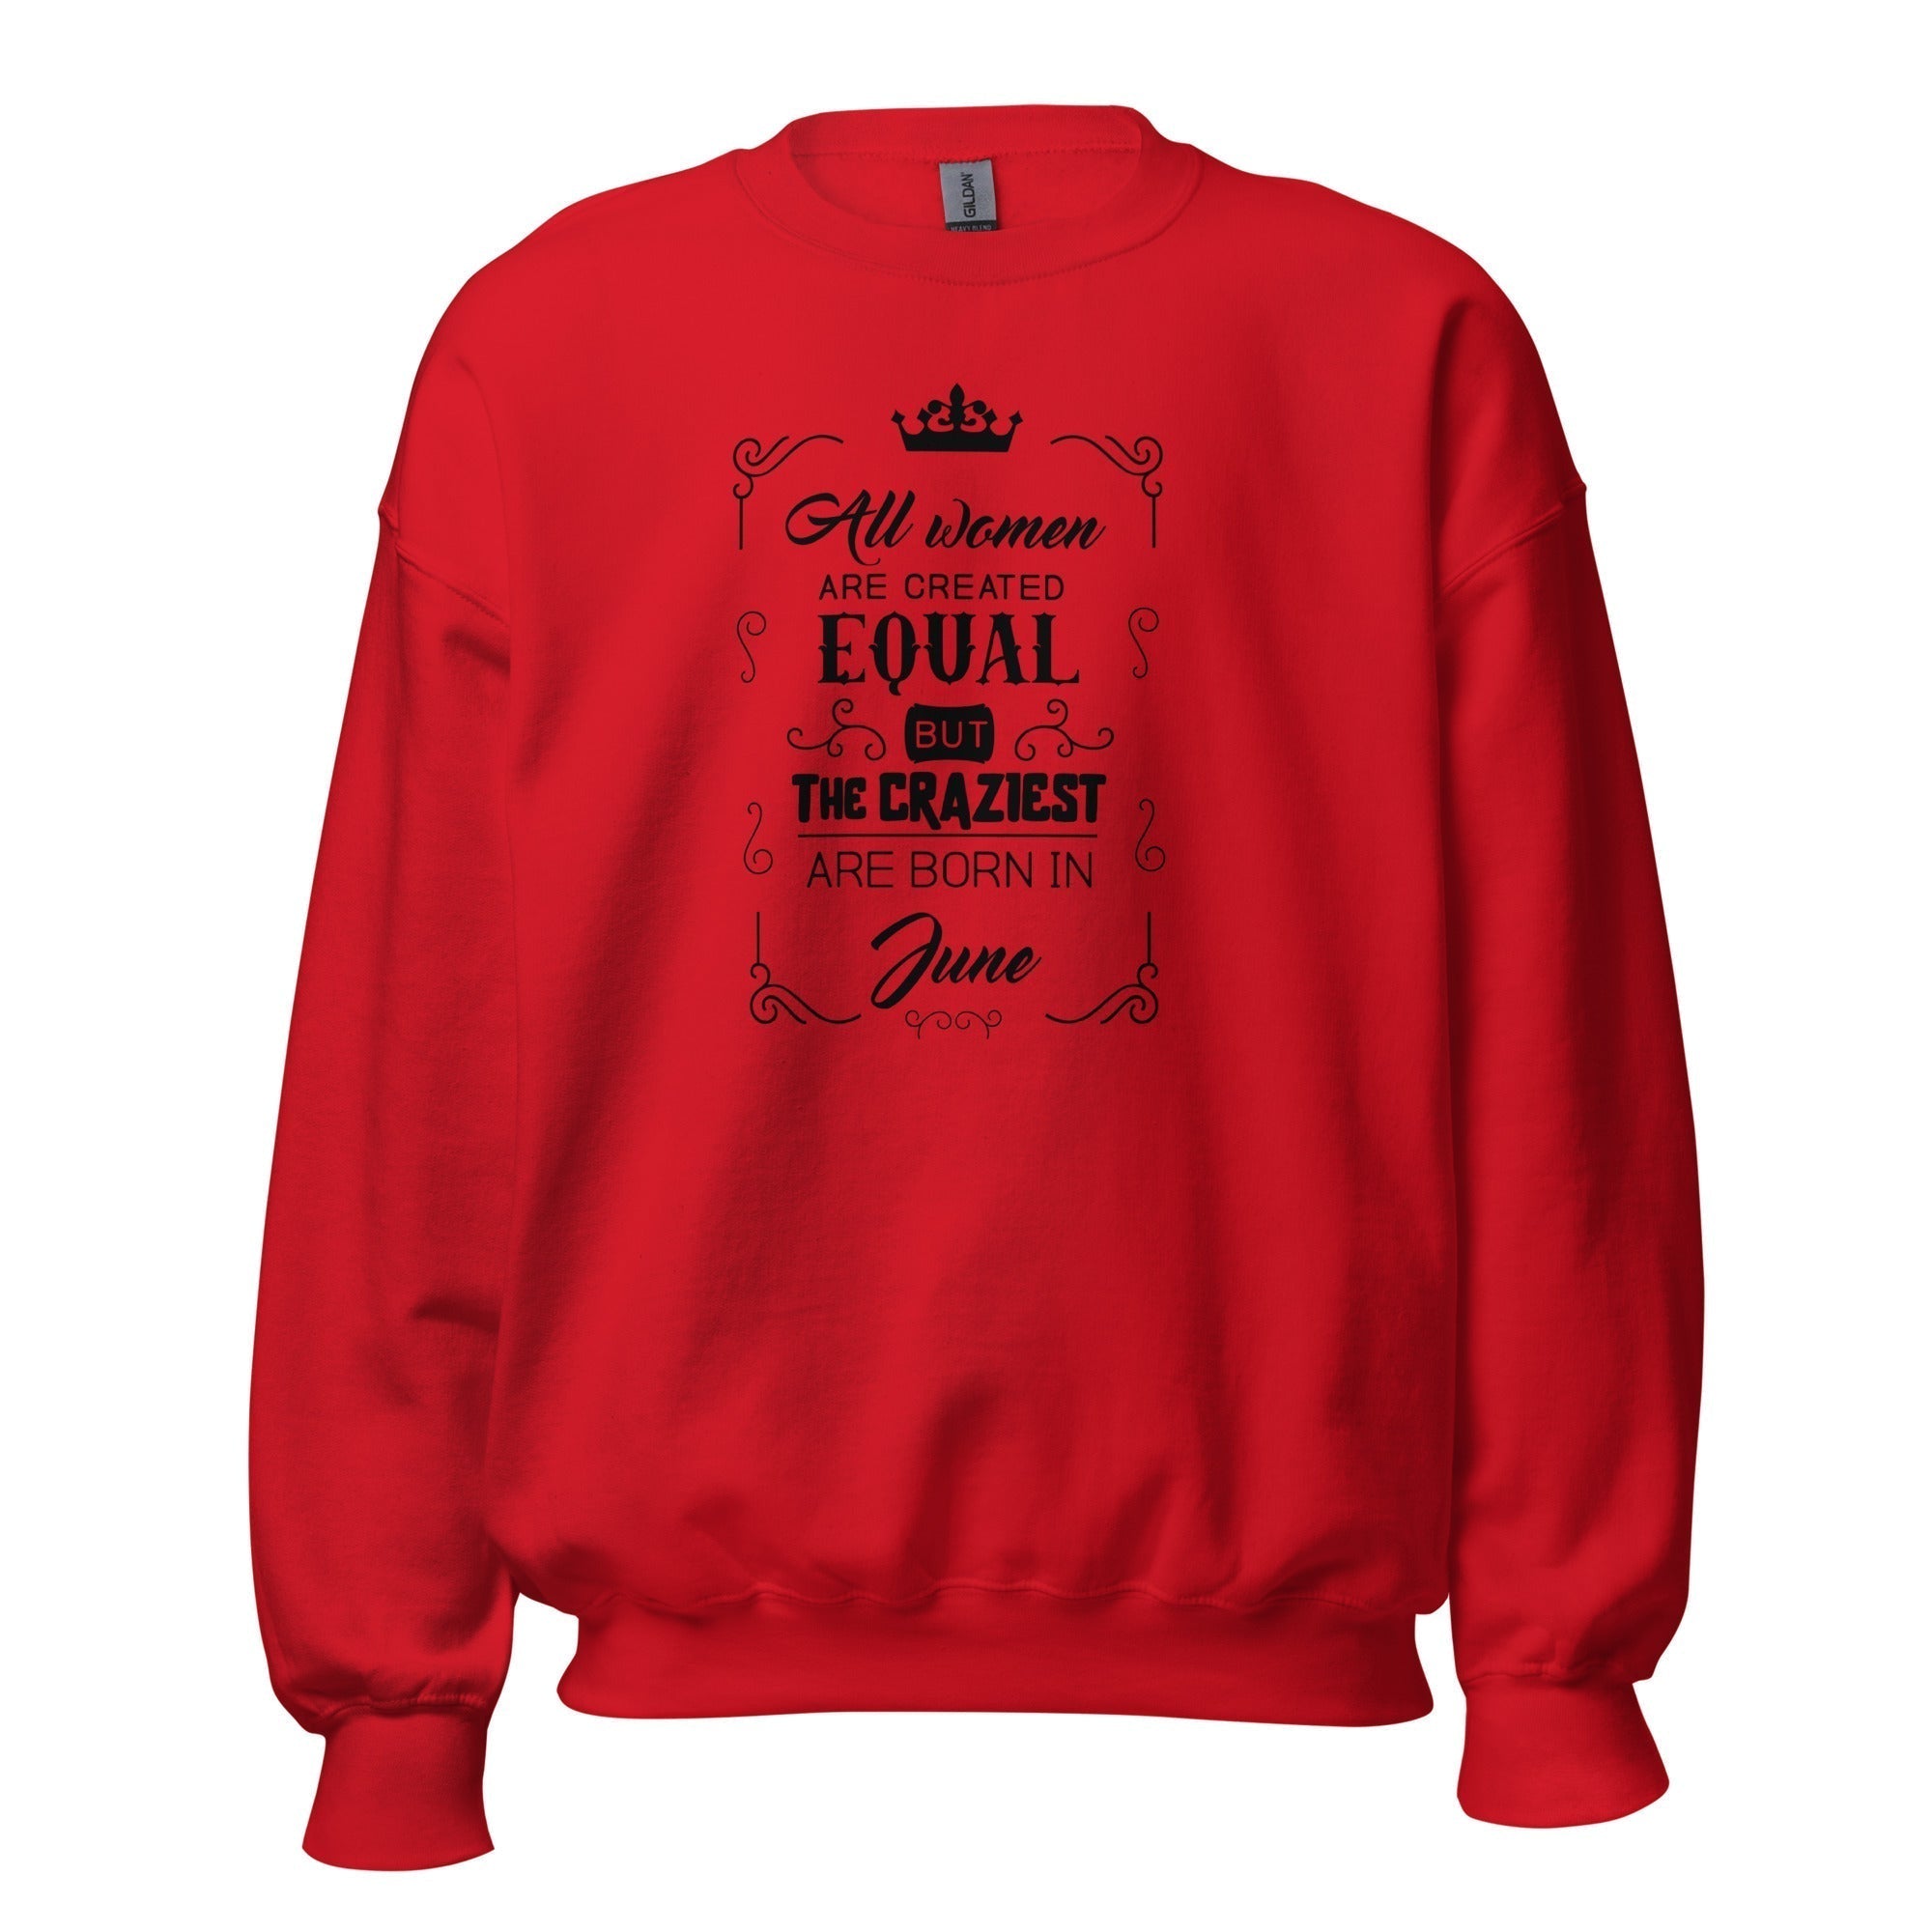 Women's Crew Neck Sweatshirt - All Women Are Created Equal But The Craziest Are Born In June - GRAPHIC T-SHIRTS